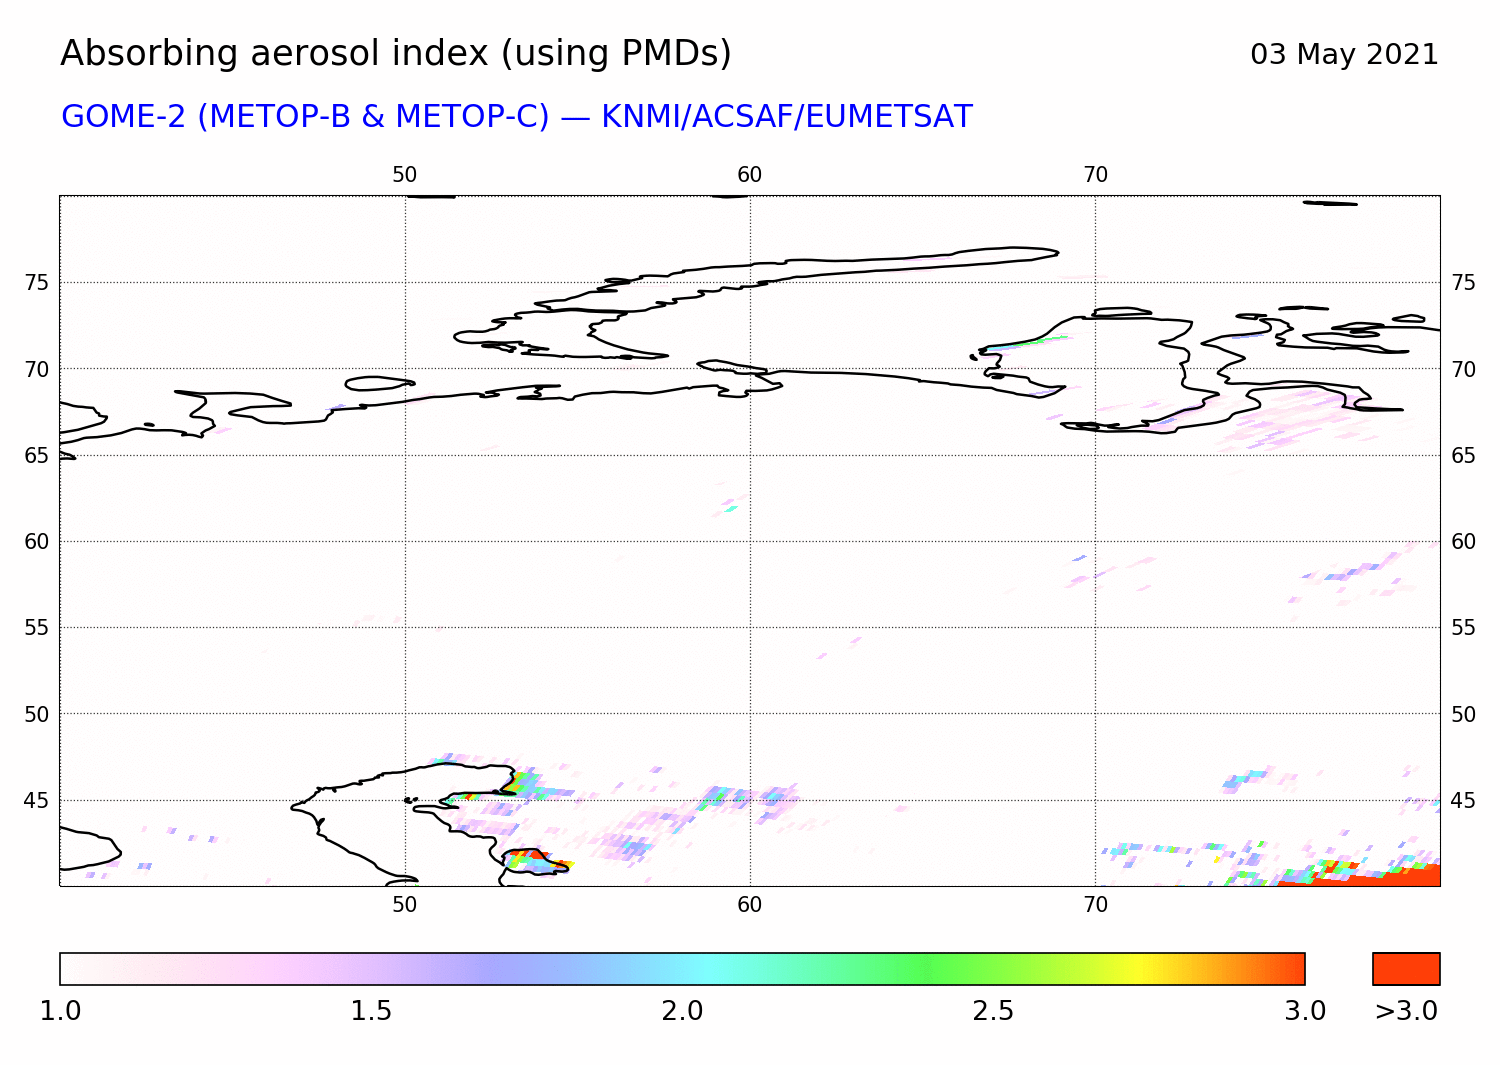 GOME-2 - Absorbing aerosol index of 03 May 2021